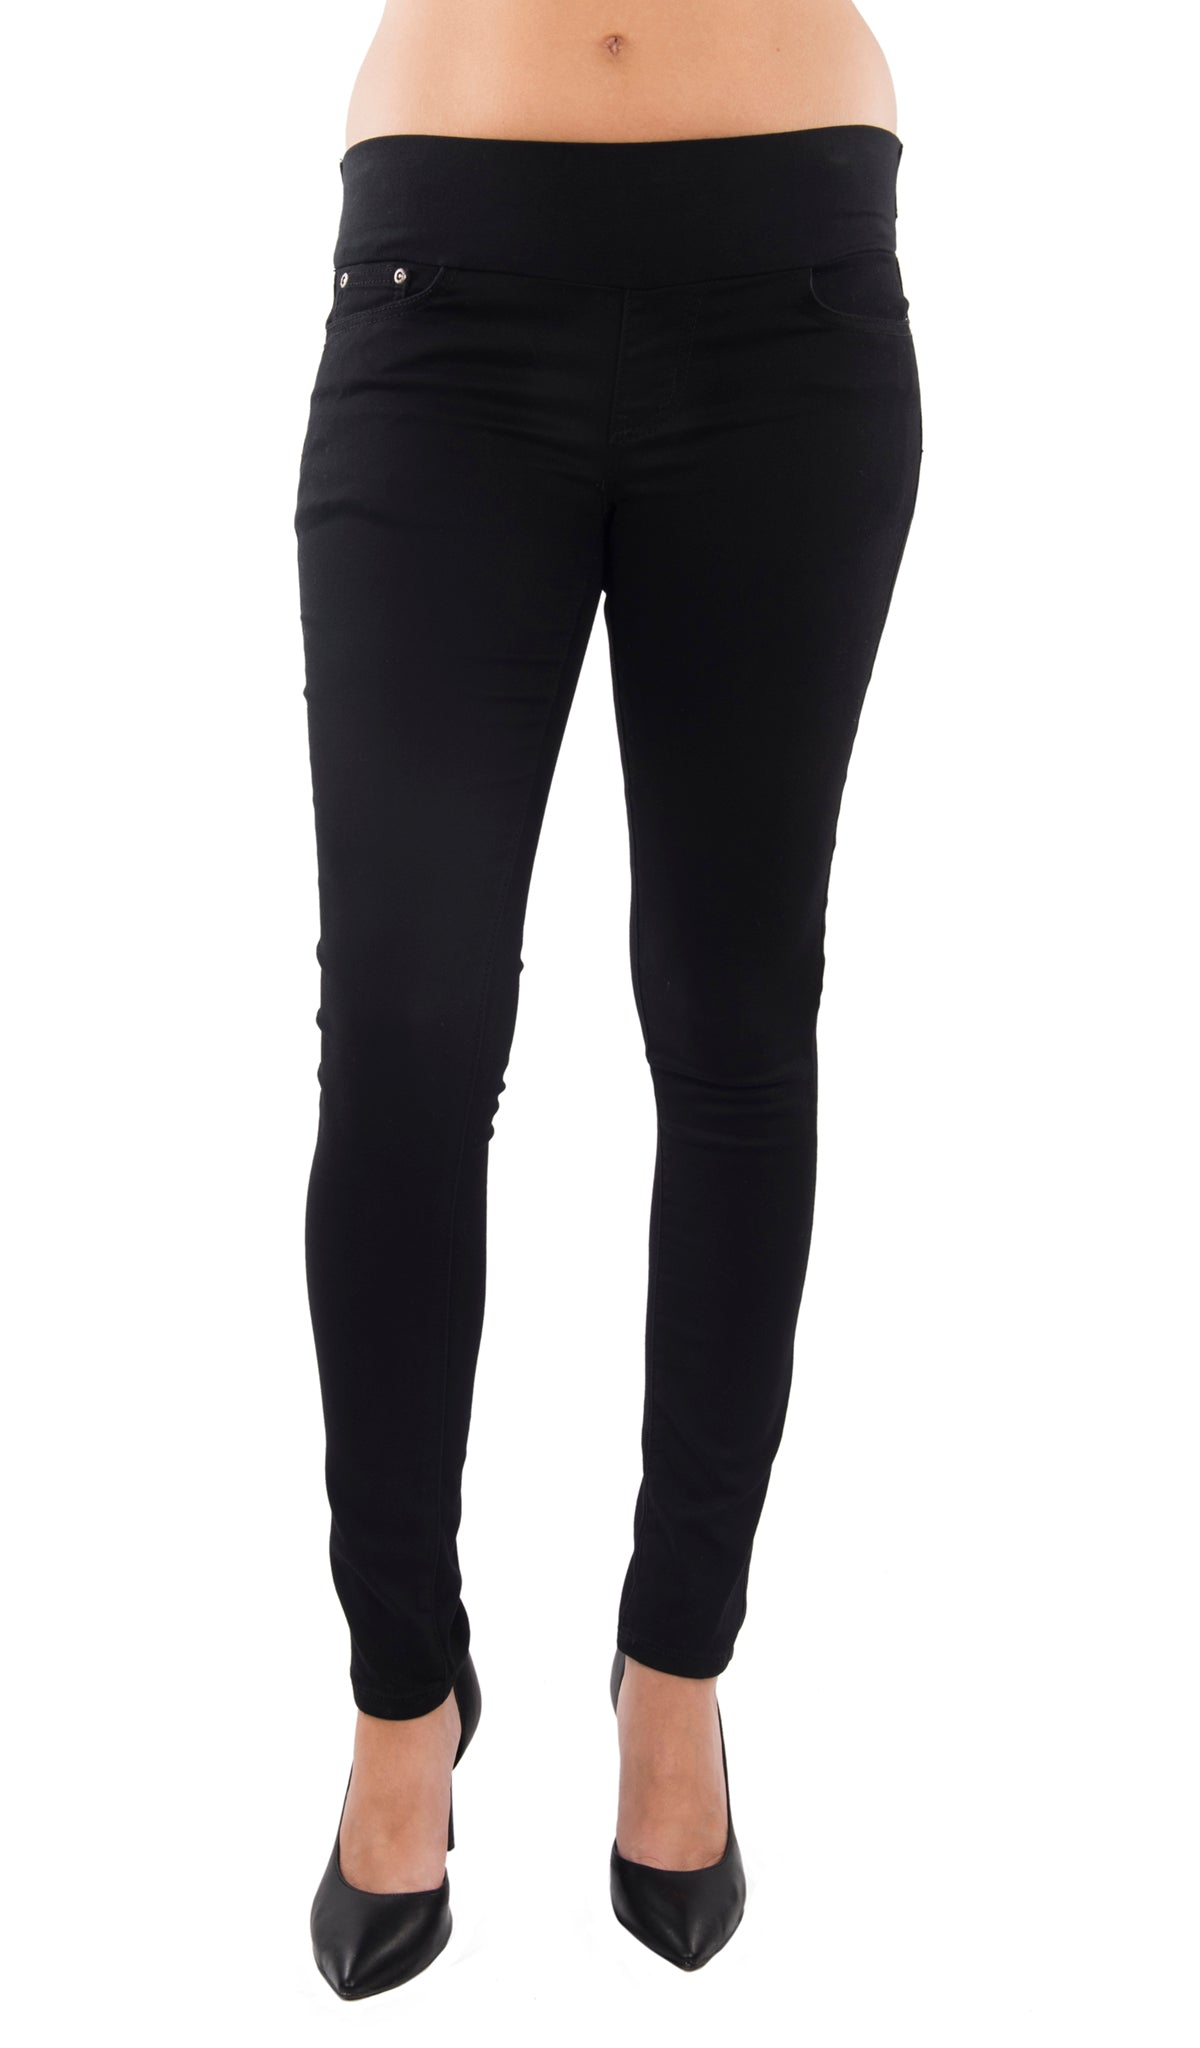 Black Aria Jean with elastic flat front panel.